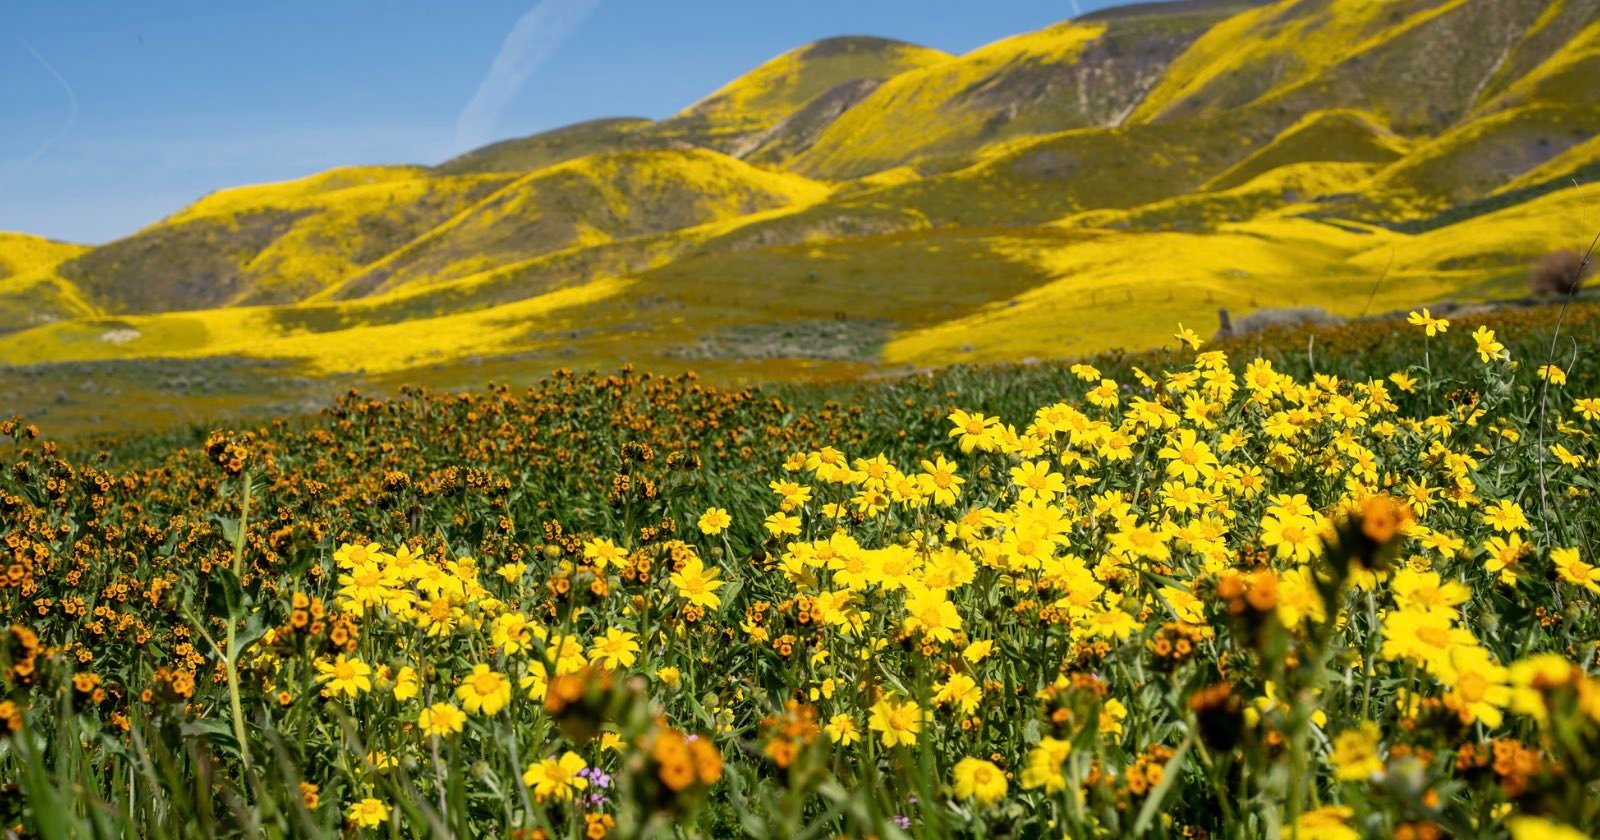 Photographers Should Prepare For Another Impressive California Superbloom